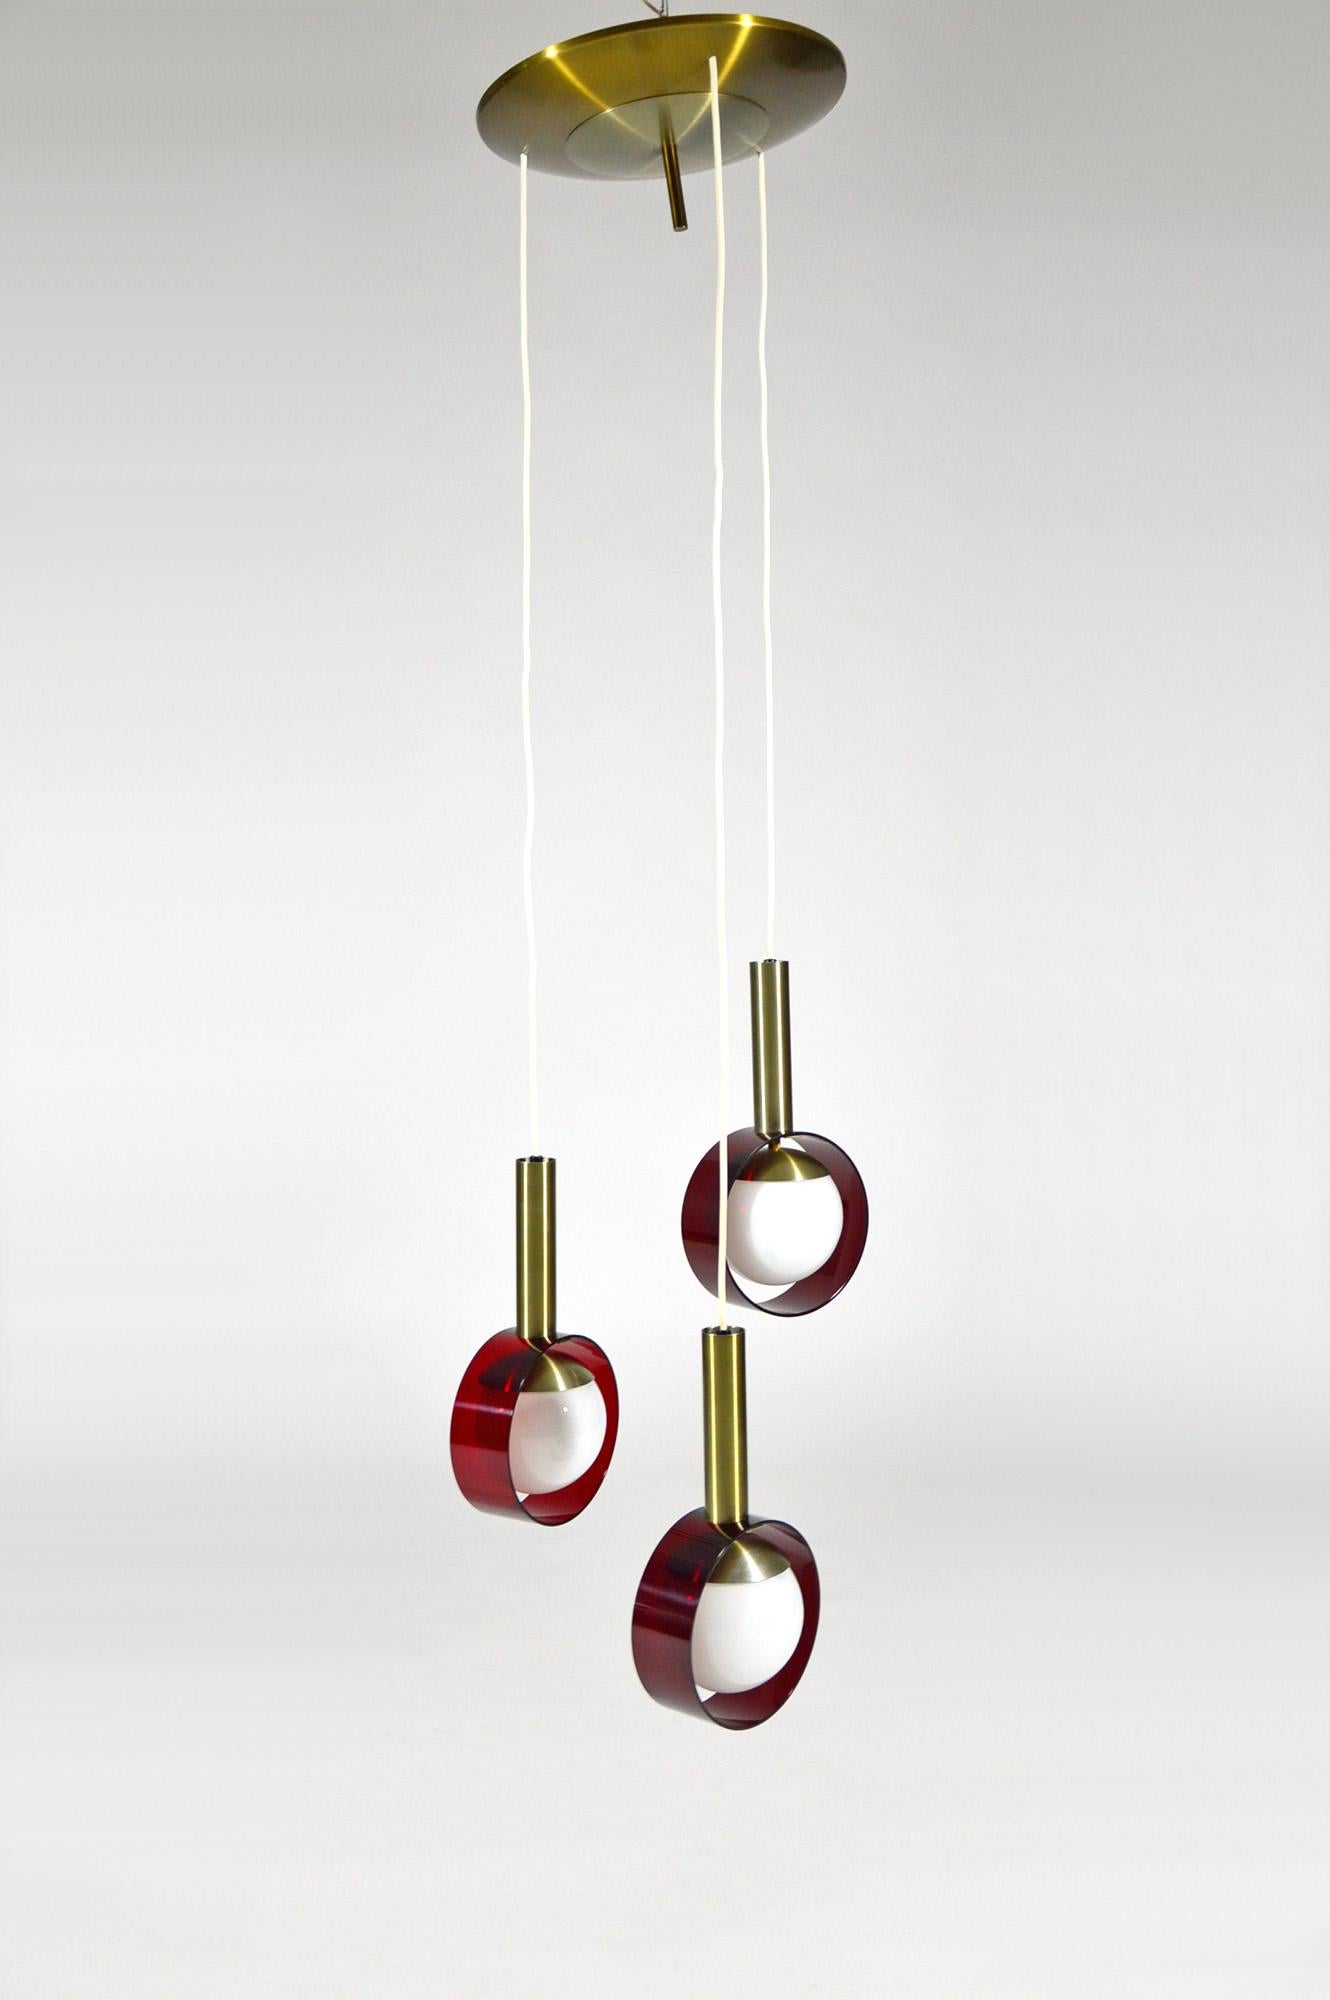 A cascade chandelier with three pendants manufactured in Italy by Stilux, circa 1960.
Made of anodized aluminium, opaline glass globes and red Lucite rings.
The maximum height is 150 centimetres, but the wires can be easily shortened.